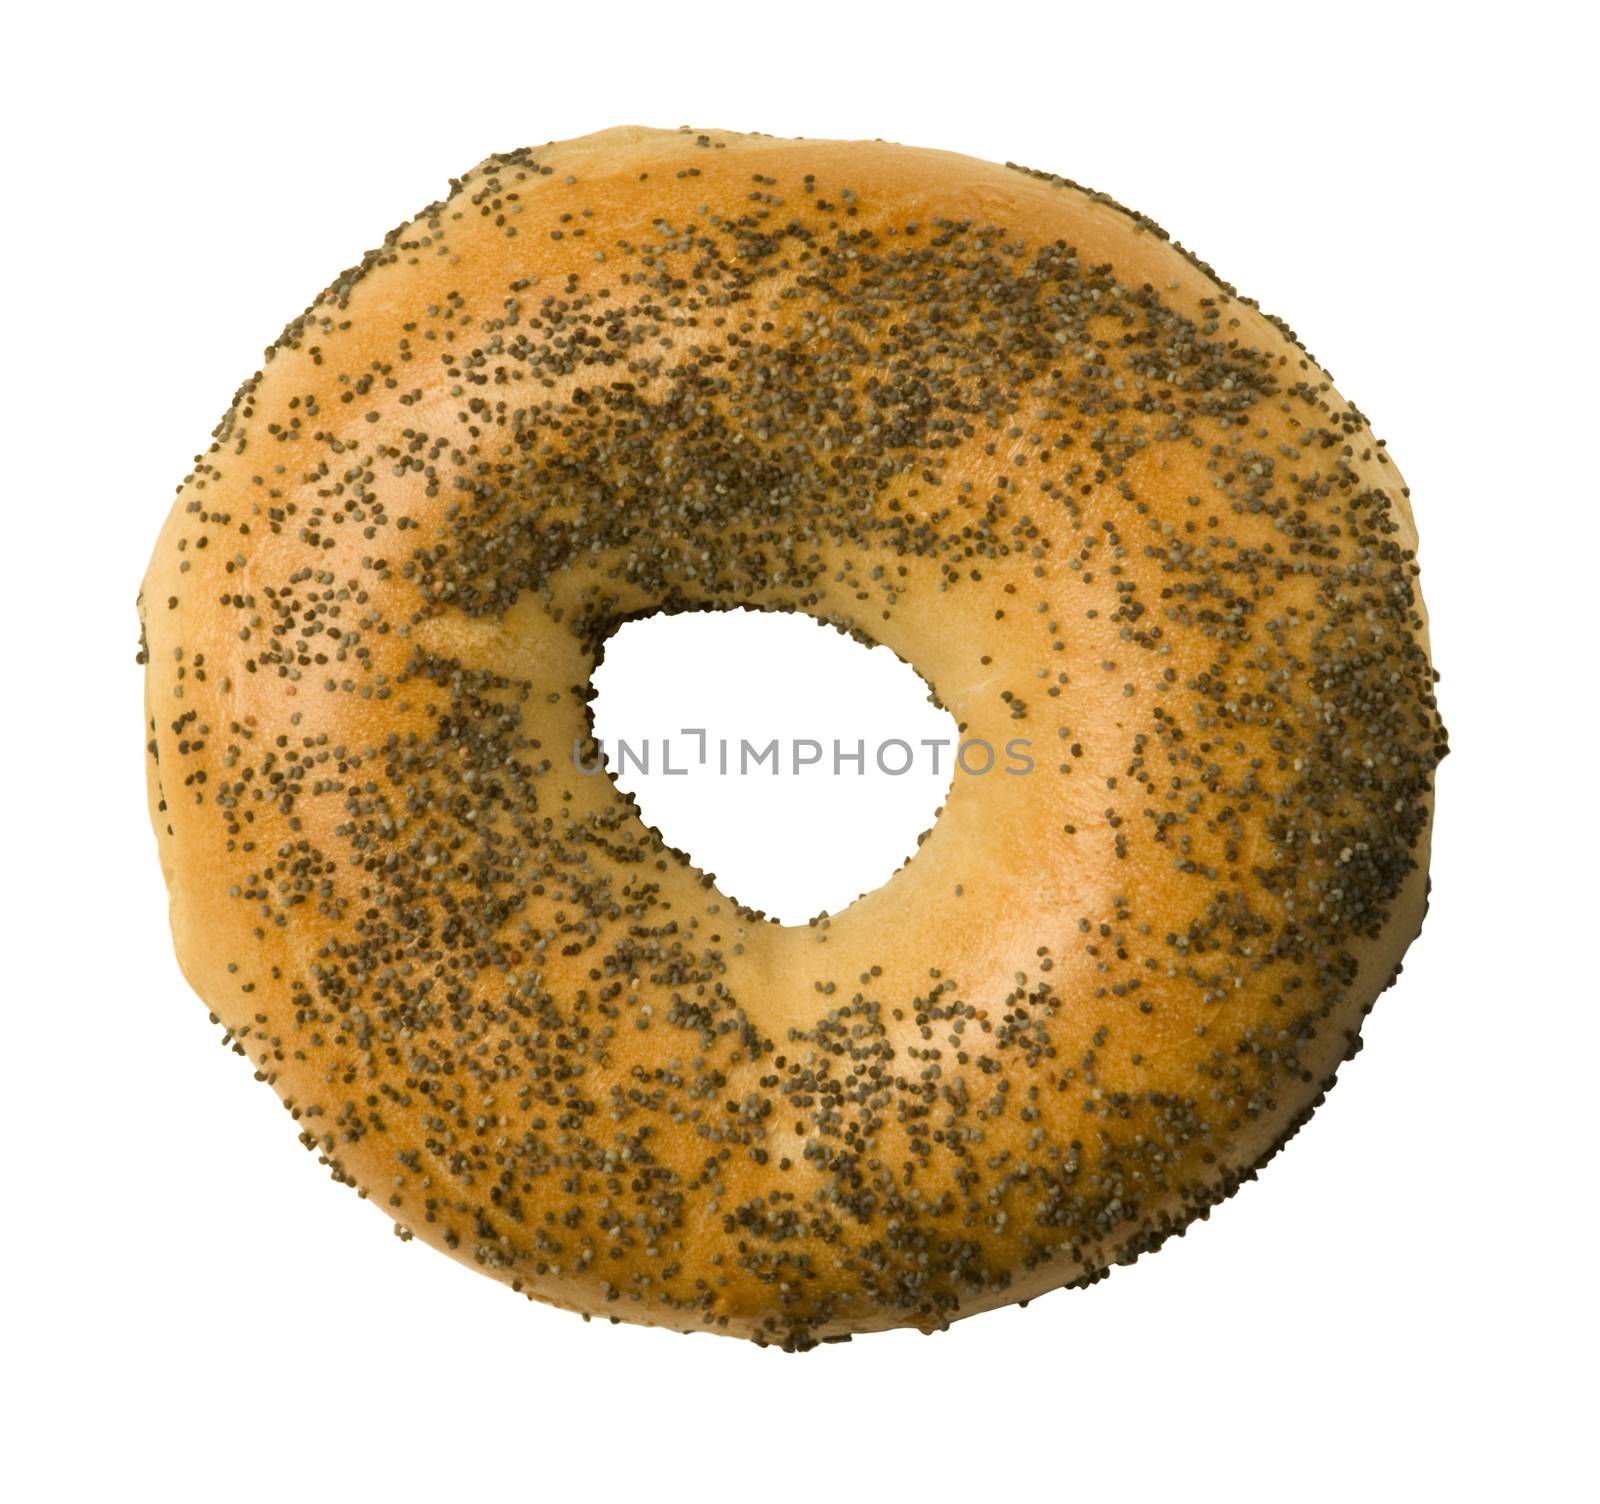 Poppy Seed Bagel Against White by Balefire9